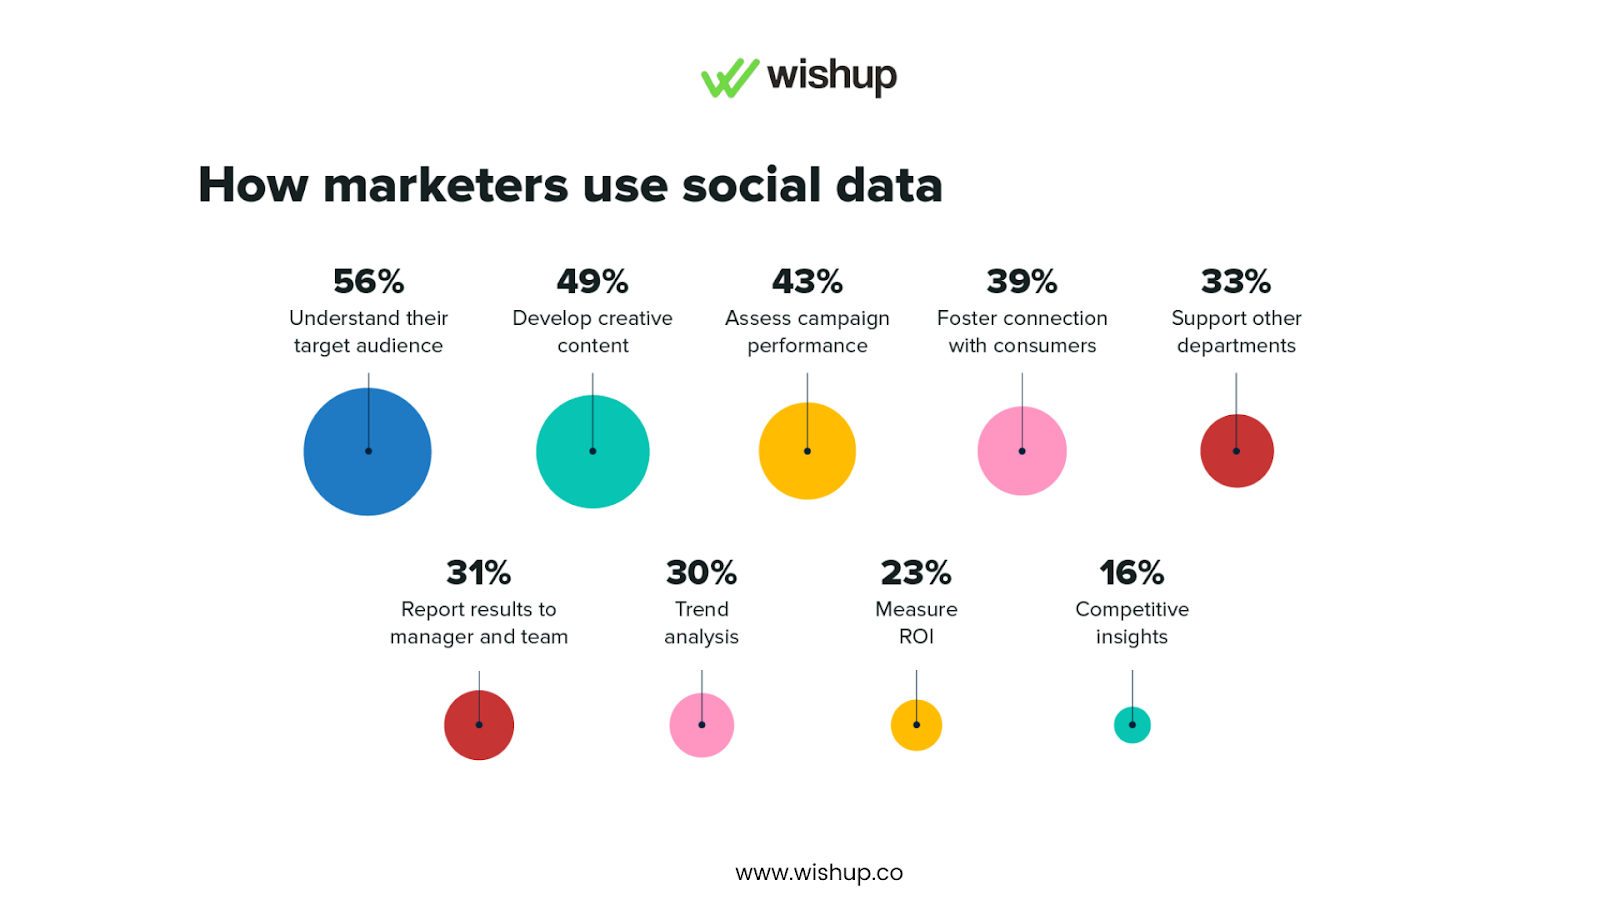 Image depicting how marketers use social data